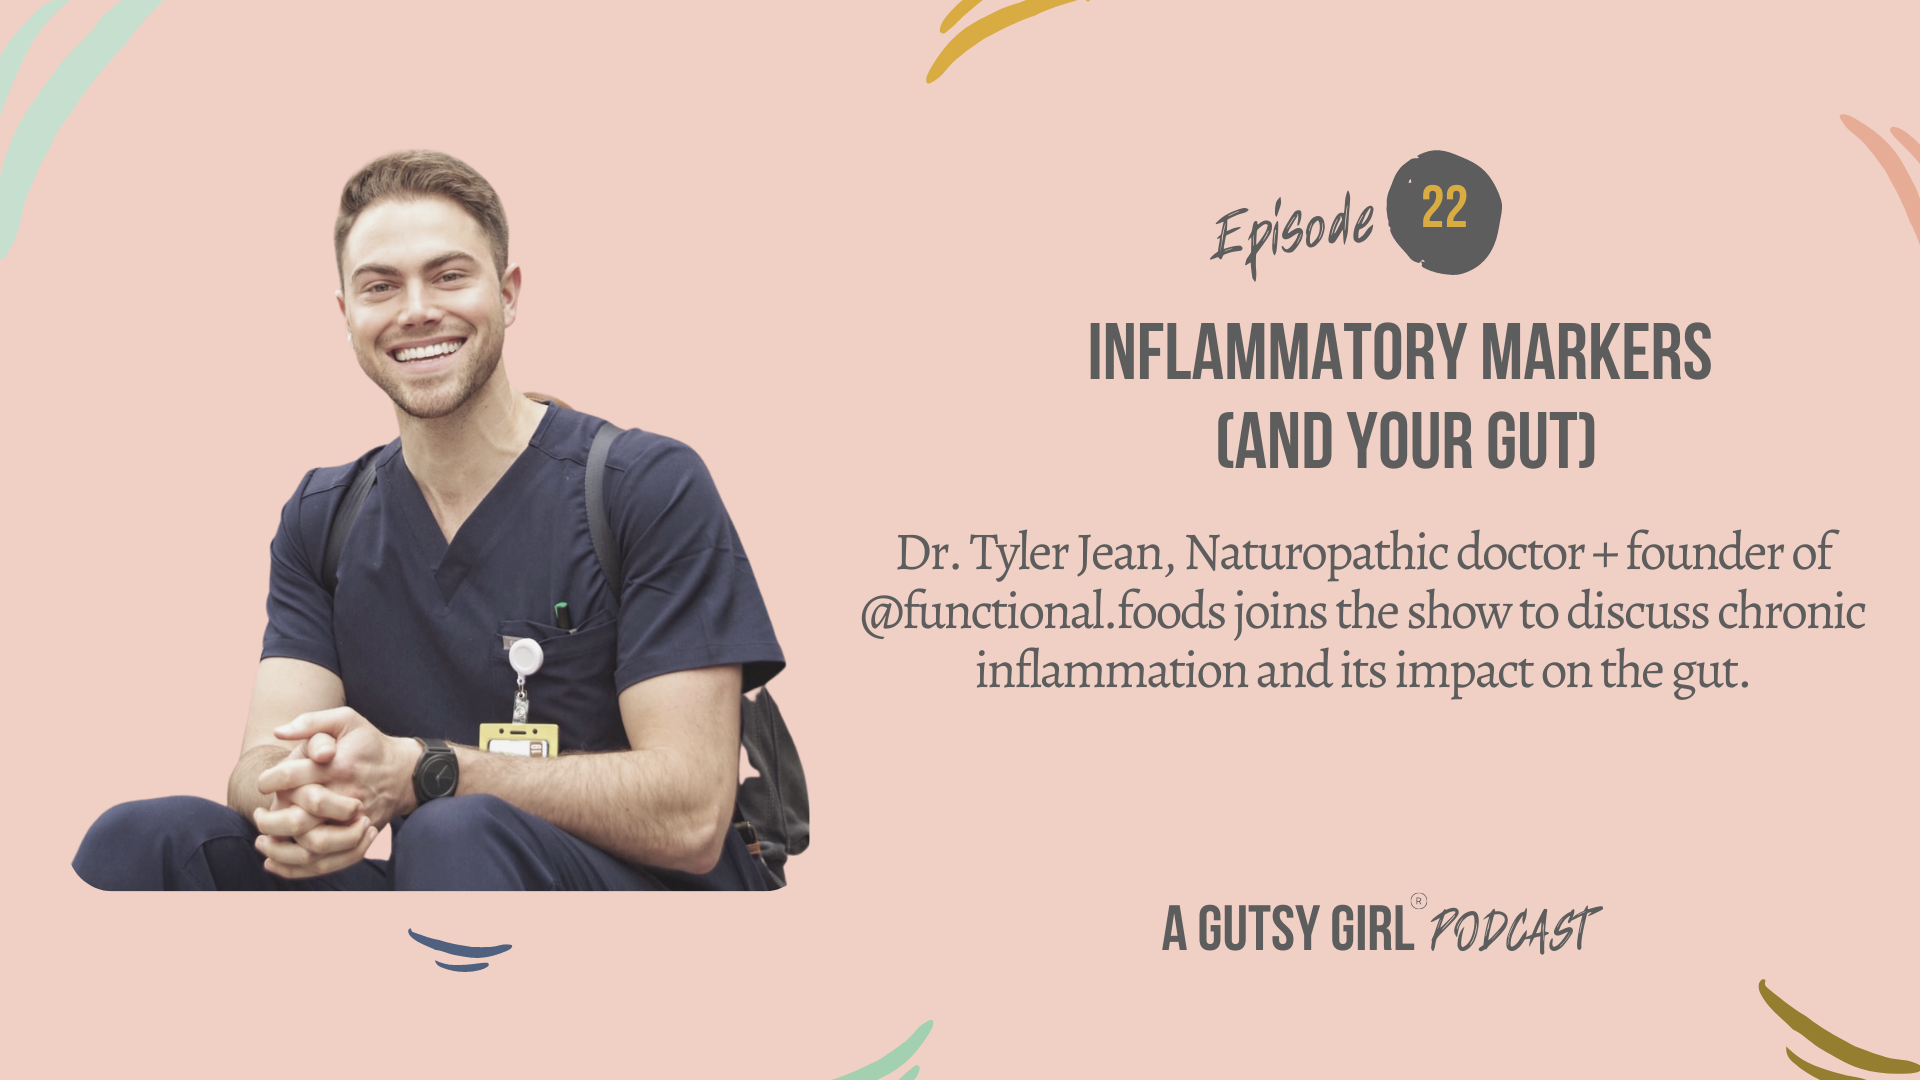 Inflammatory Markers (and your gut)